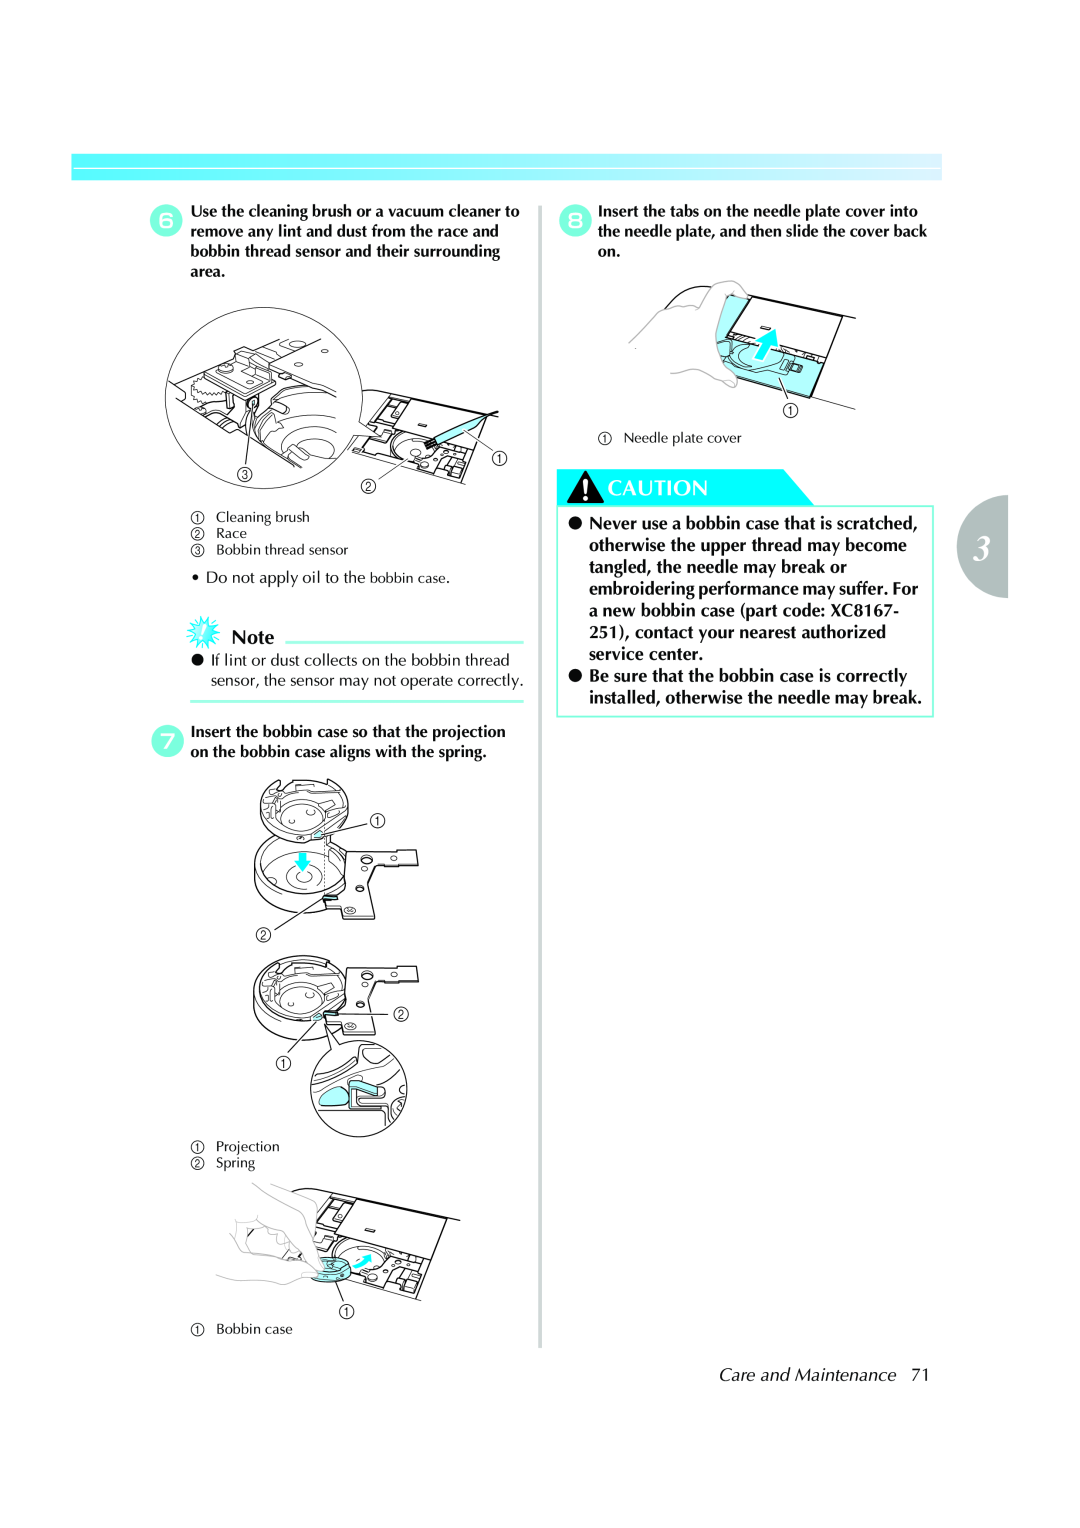 Brother Computerized Embroidery Machine operation manual Care and Maintenance, Do not apply oil to the bobbin case 